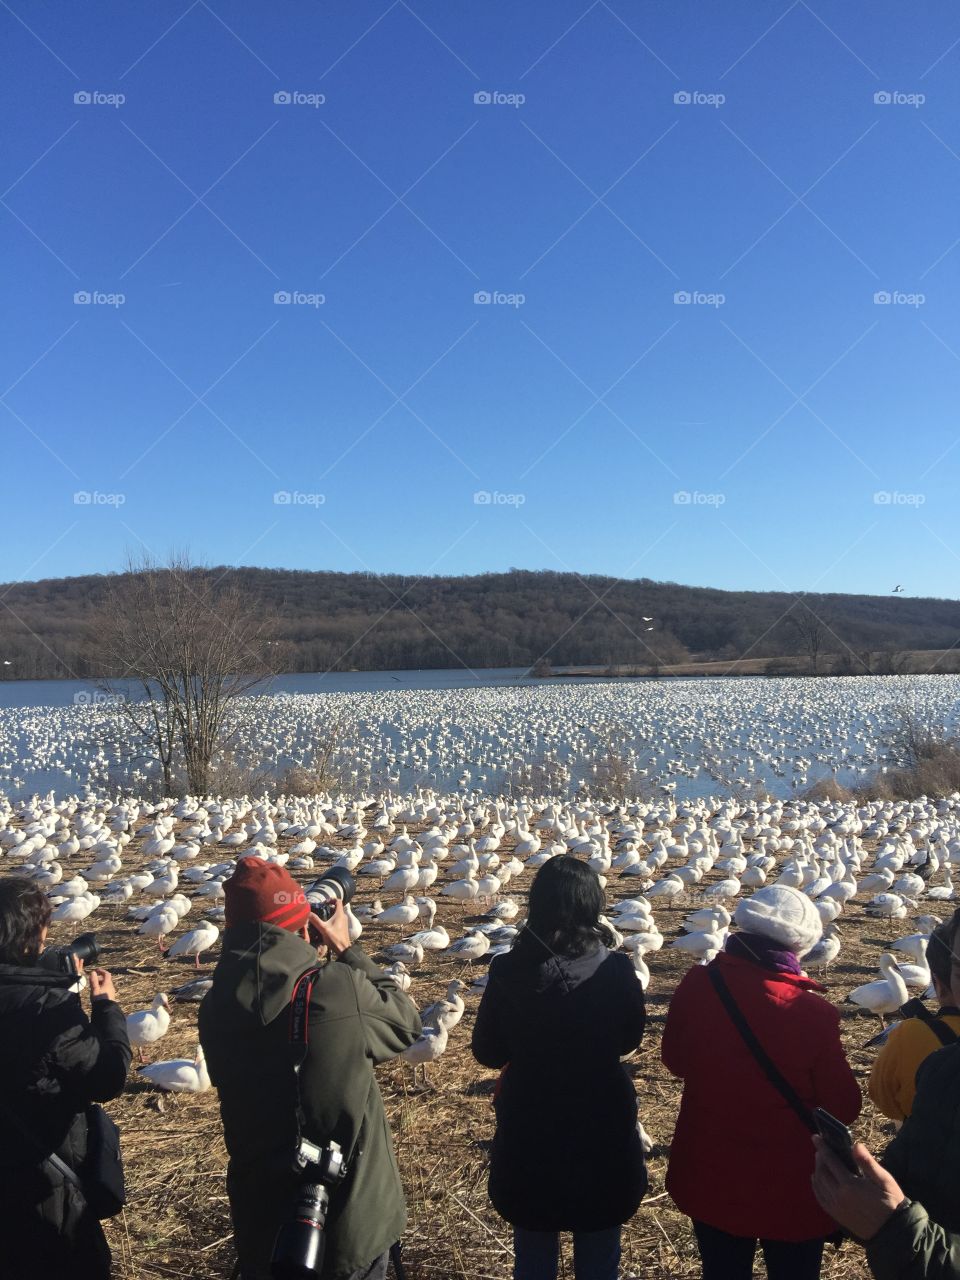 So many snow geese and people crazy trying to take pics and see what’s going on at the same time 